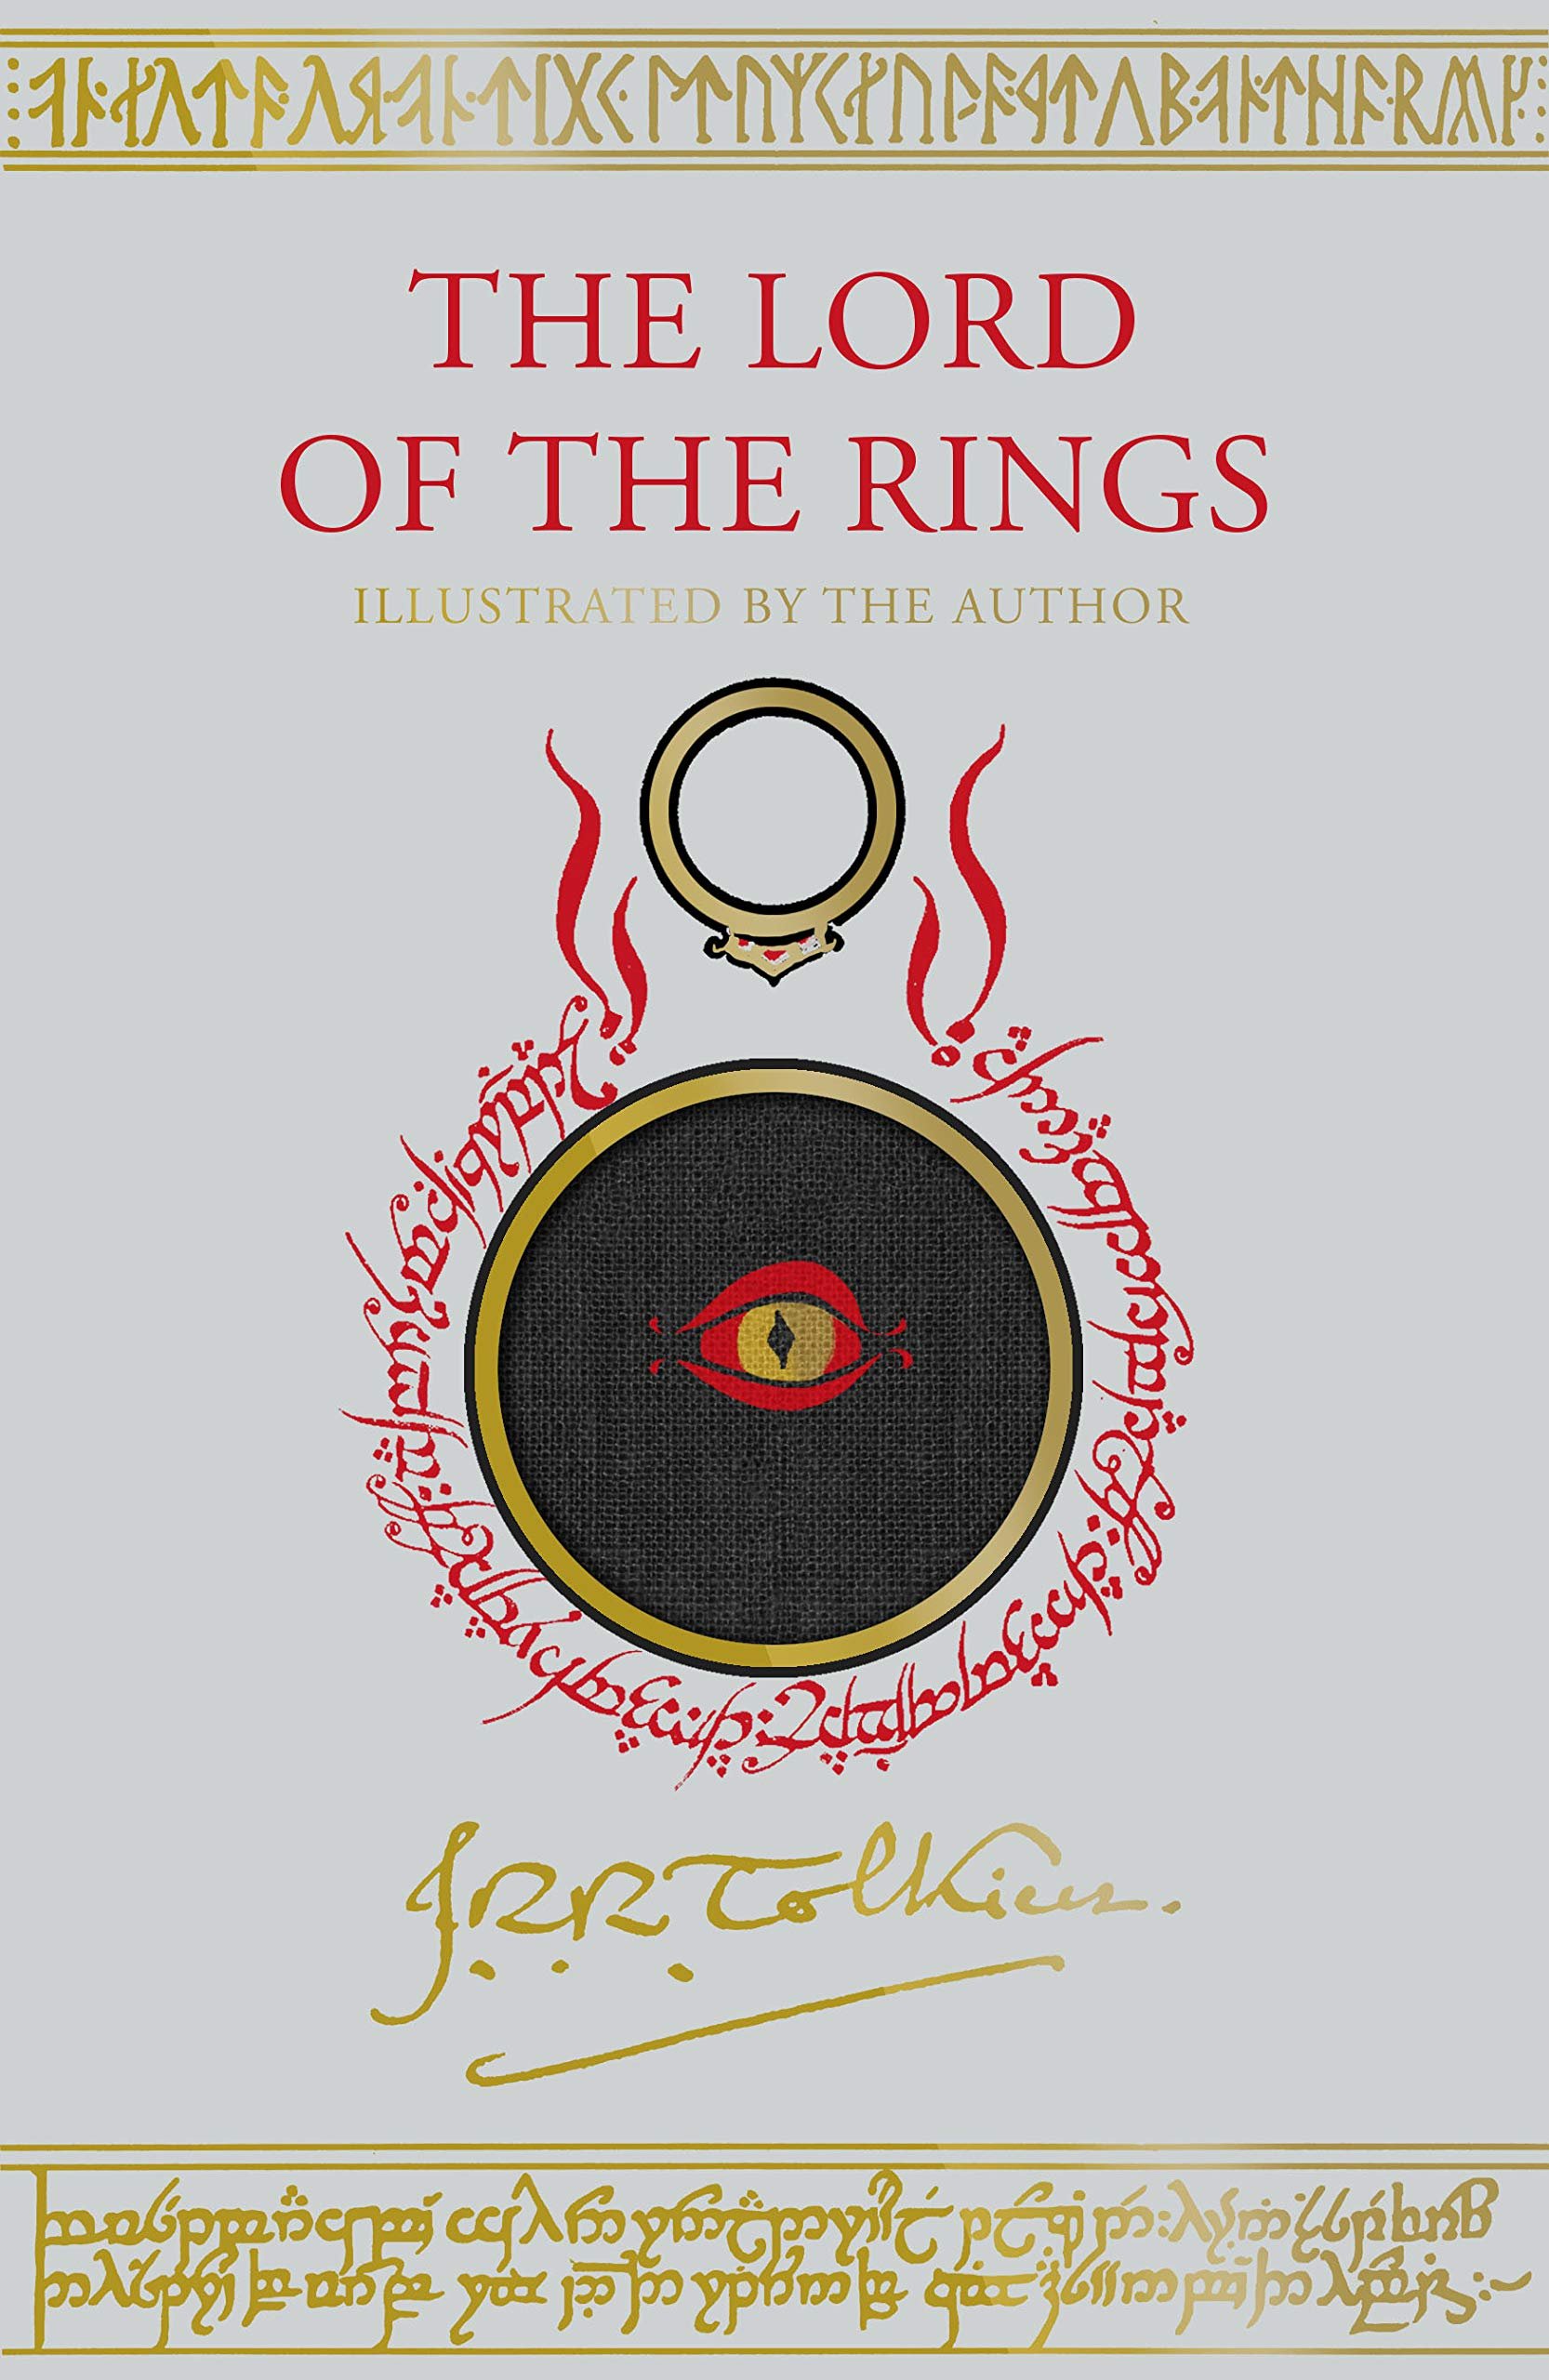 Film Review: The Lord of the Rings (1978) | A Bloke's Blog